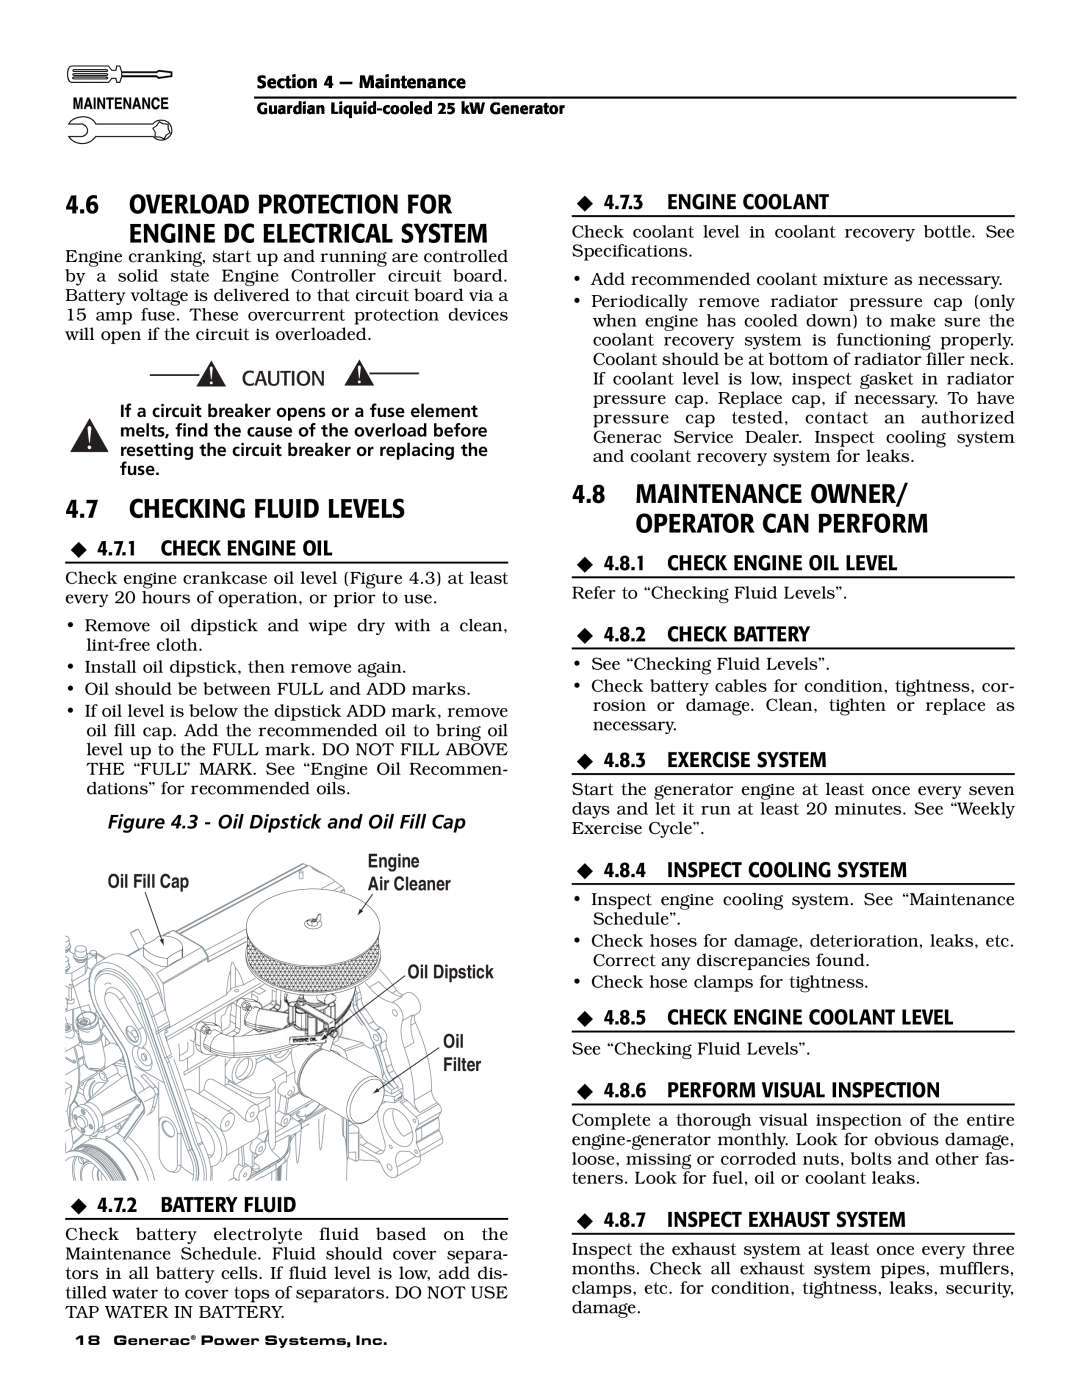 Generac Power Systems 005053-0, 005053-1 Overload Protection For Engine Dc Electrical System, Checking Fluid Levels 